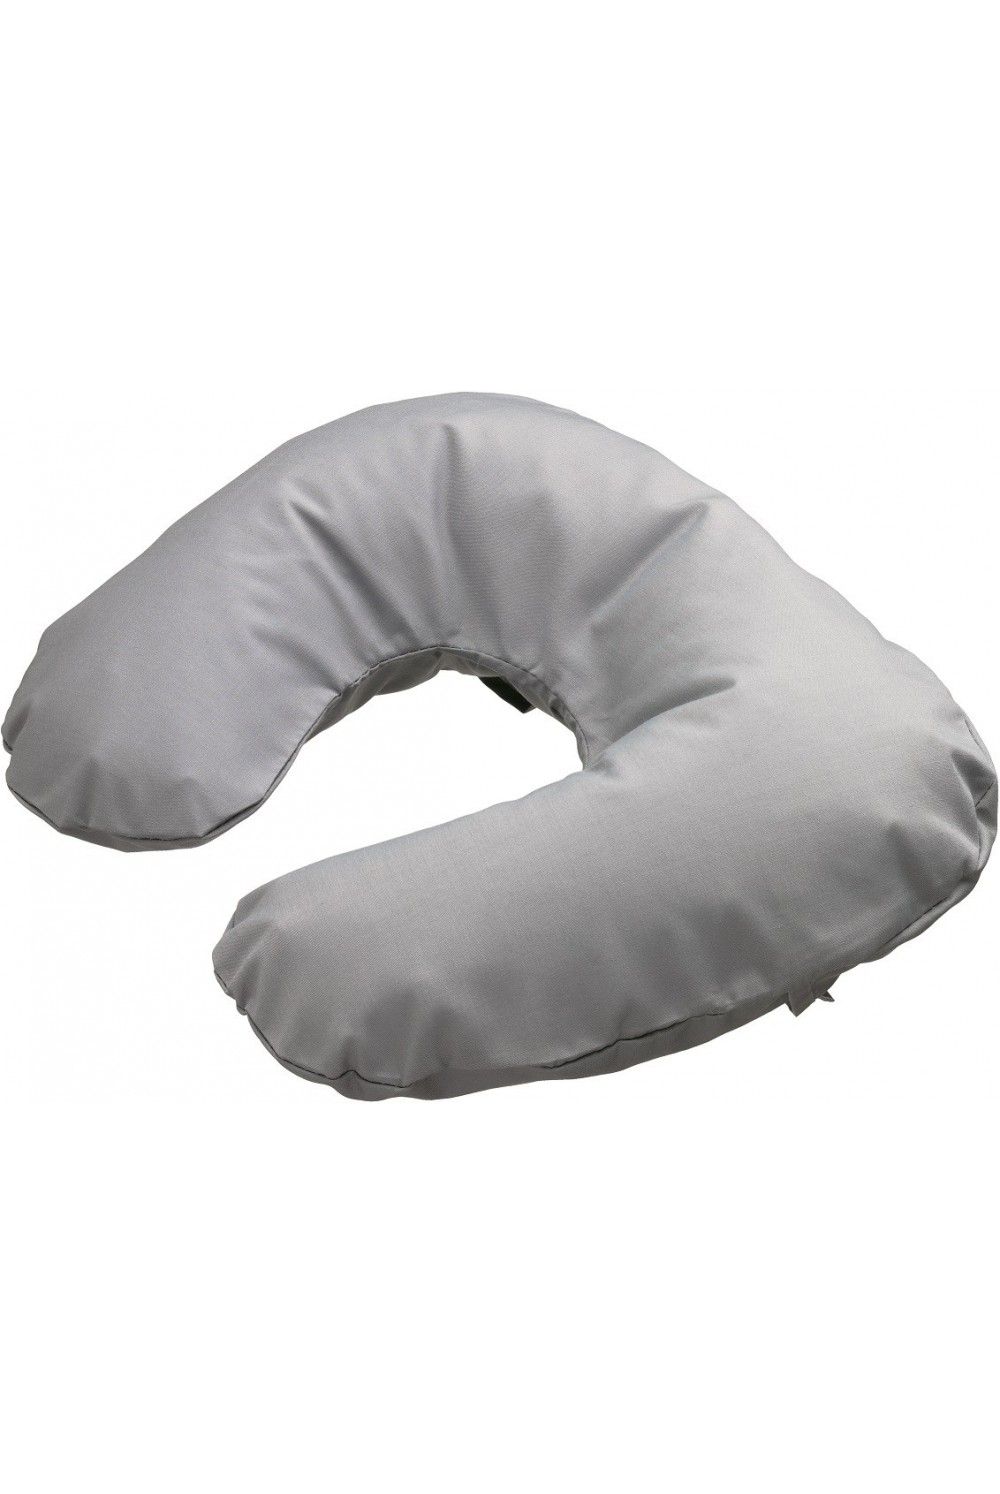 Go Travel Inflatable Neck Pillow